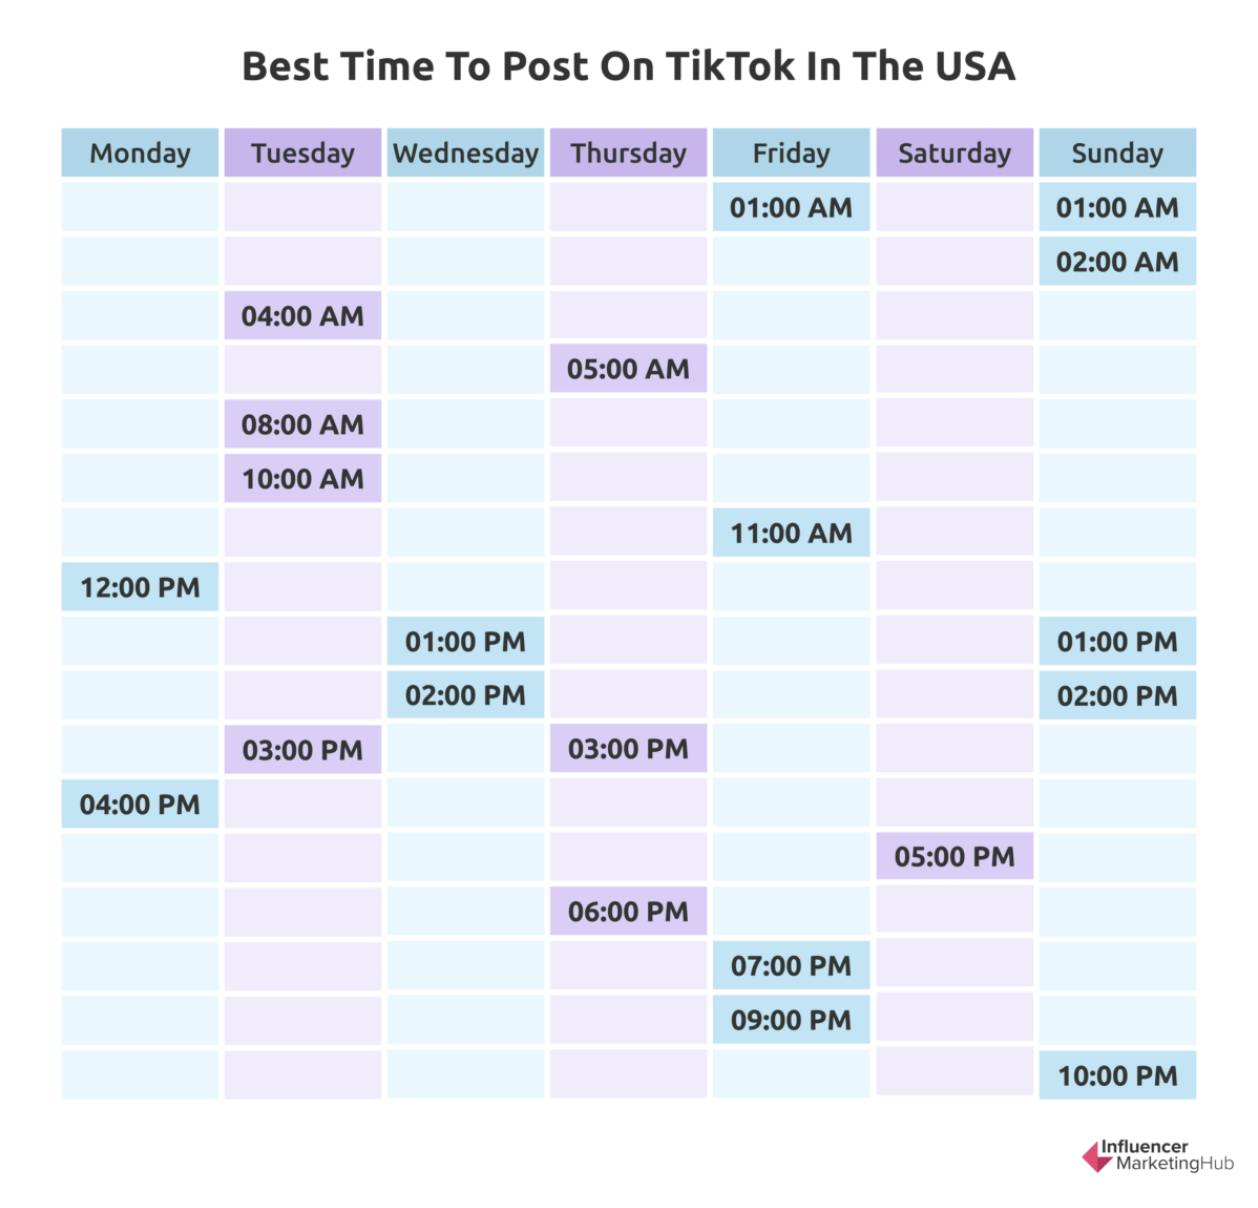 Best time to post on TikTok in USA chart